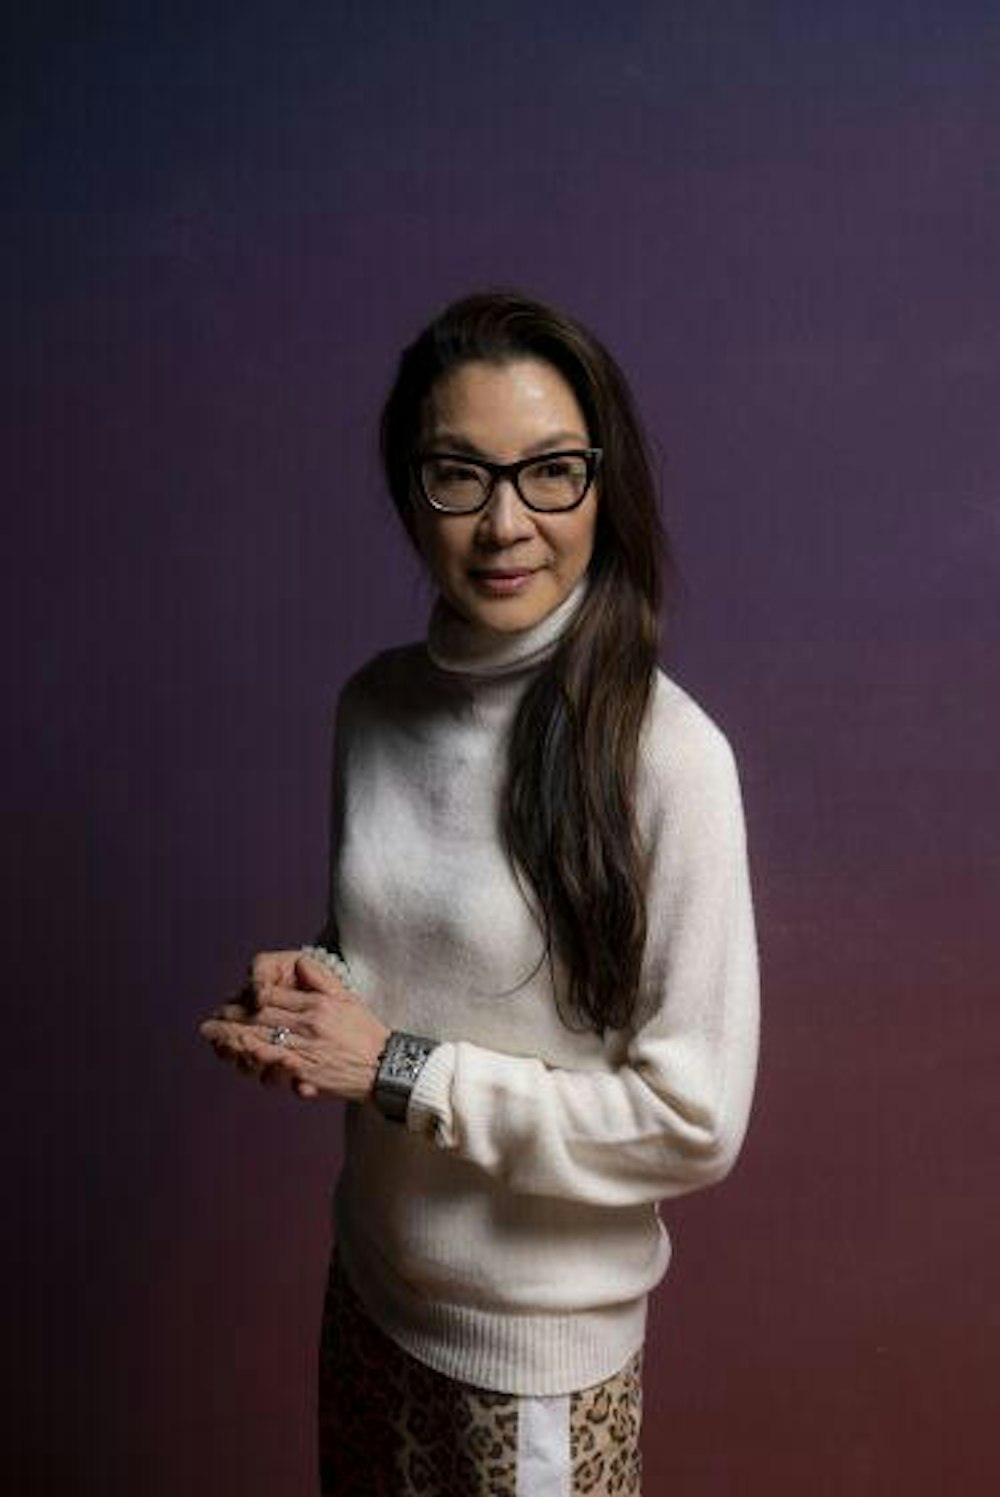 Time names Michelle Yeoh its 2022 Icon of the Year. She's ready for Oscars love too